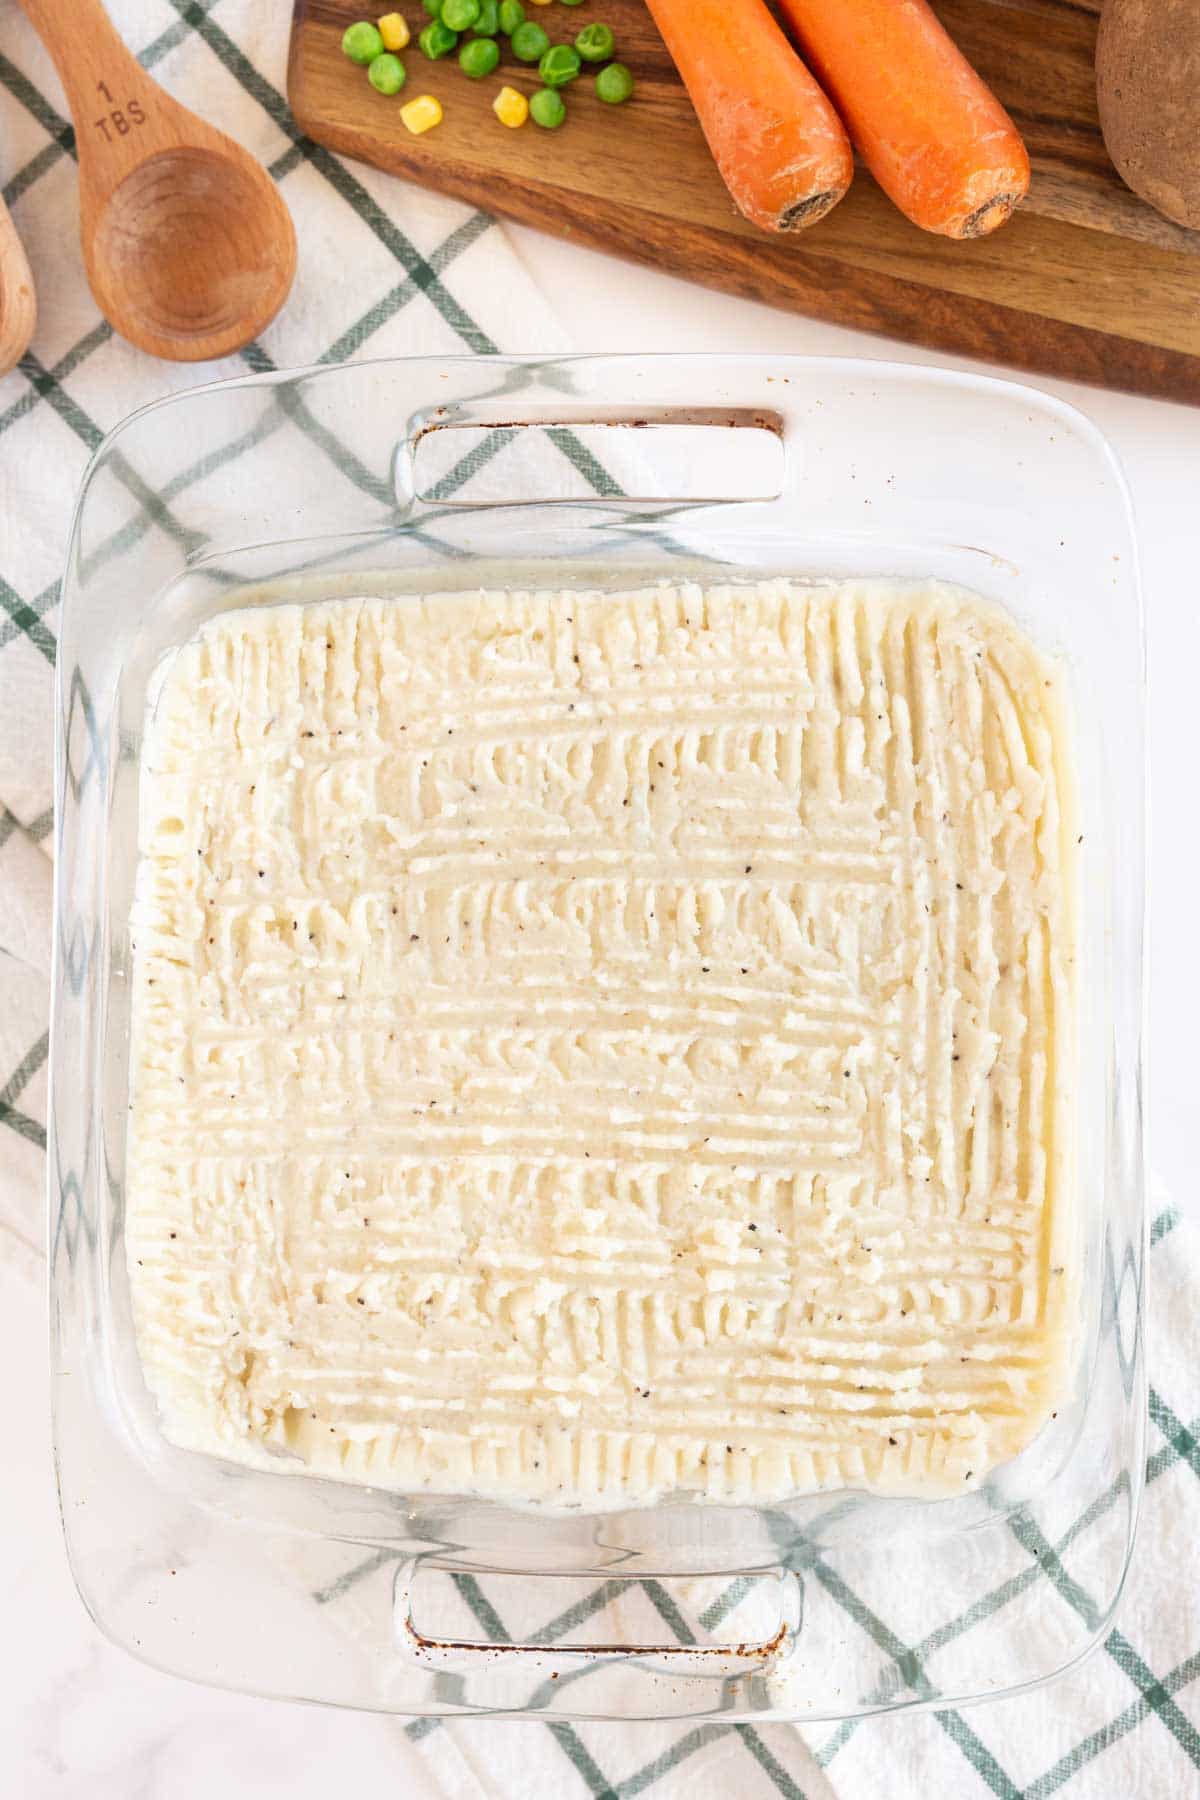 Mashed potatoes in a glass baking dish